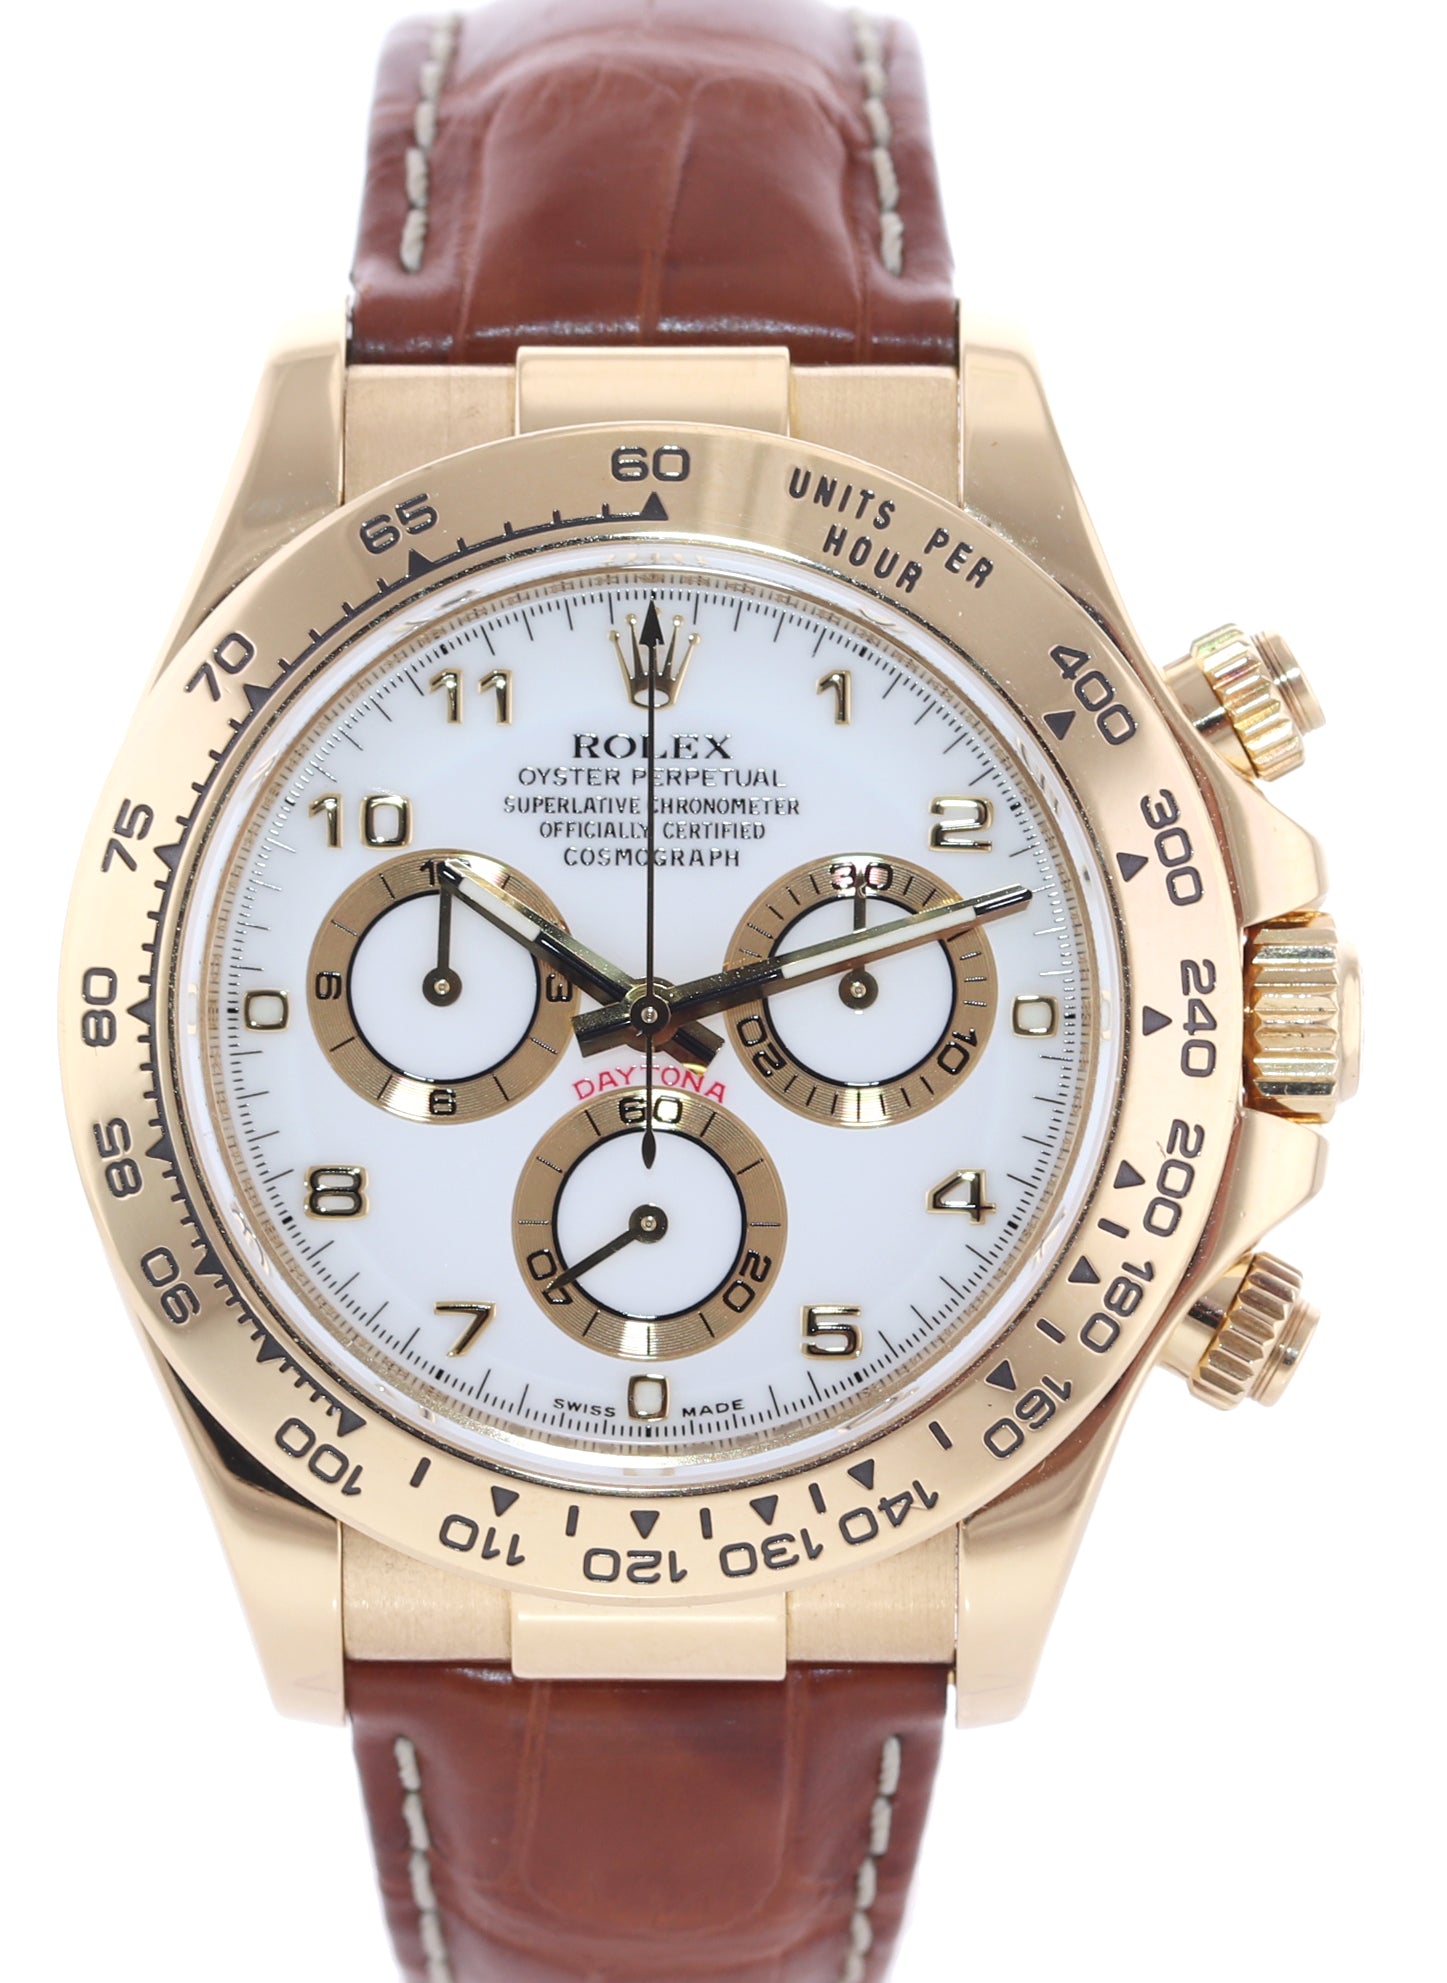 2008 PAPERS Rolex Daytona White Dial 116518 18k Yellow Gold Leather Watch Box